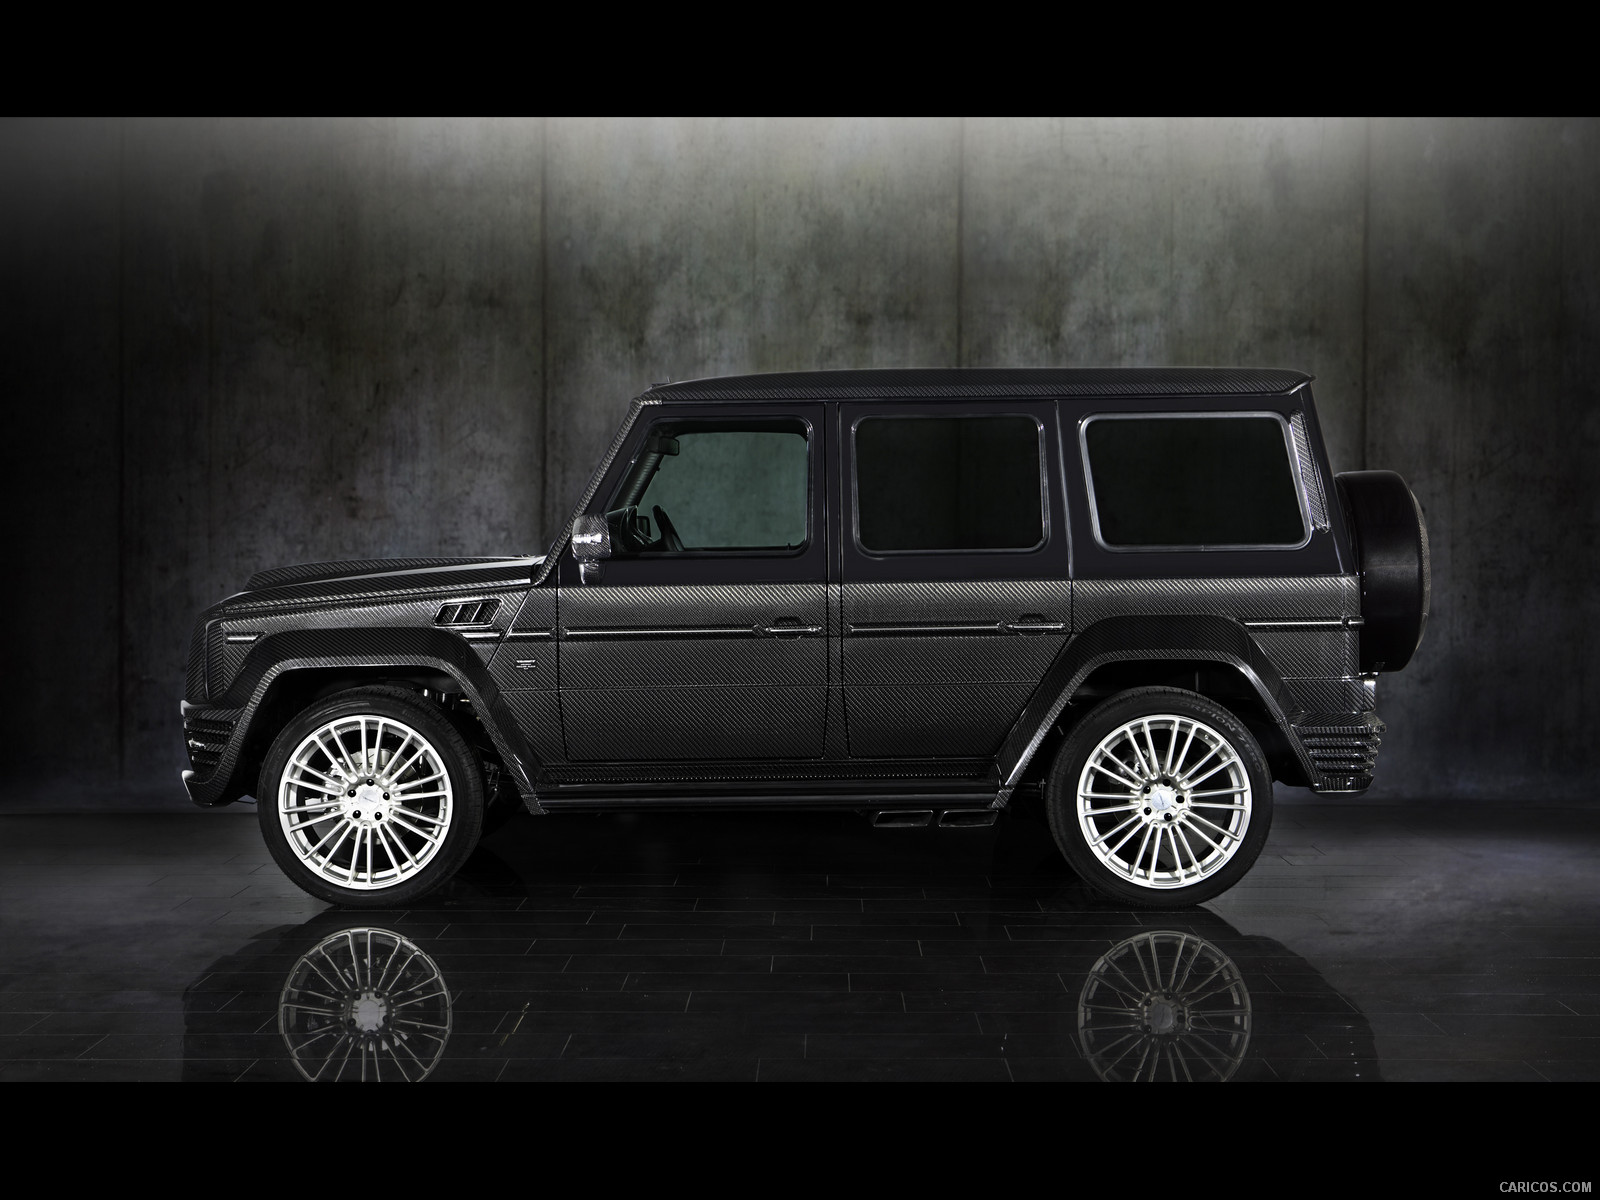 Mansory G-Couture based on Mercedes G-Class  - Side, #5 of 39